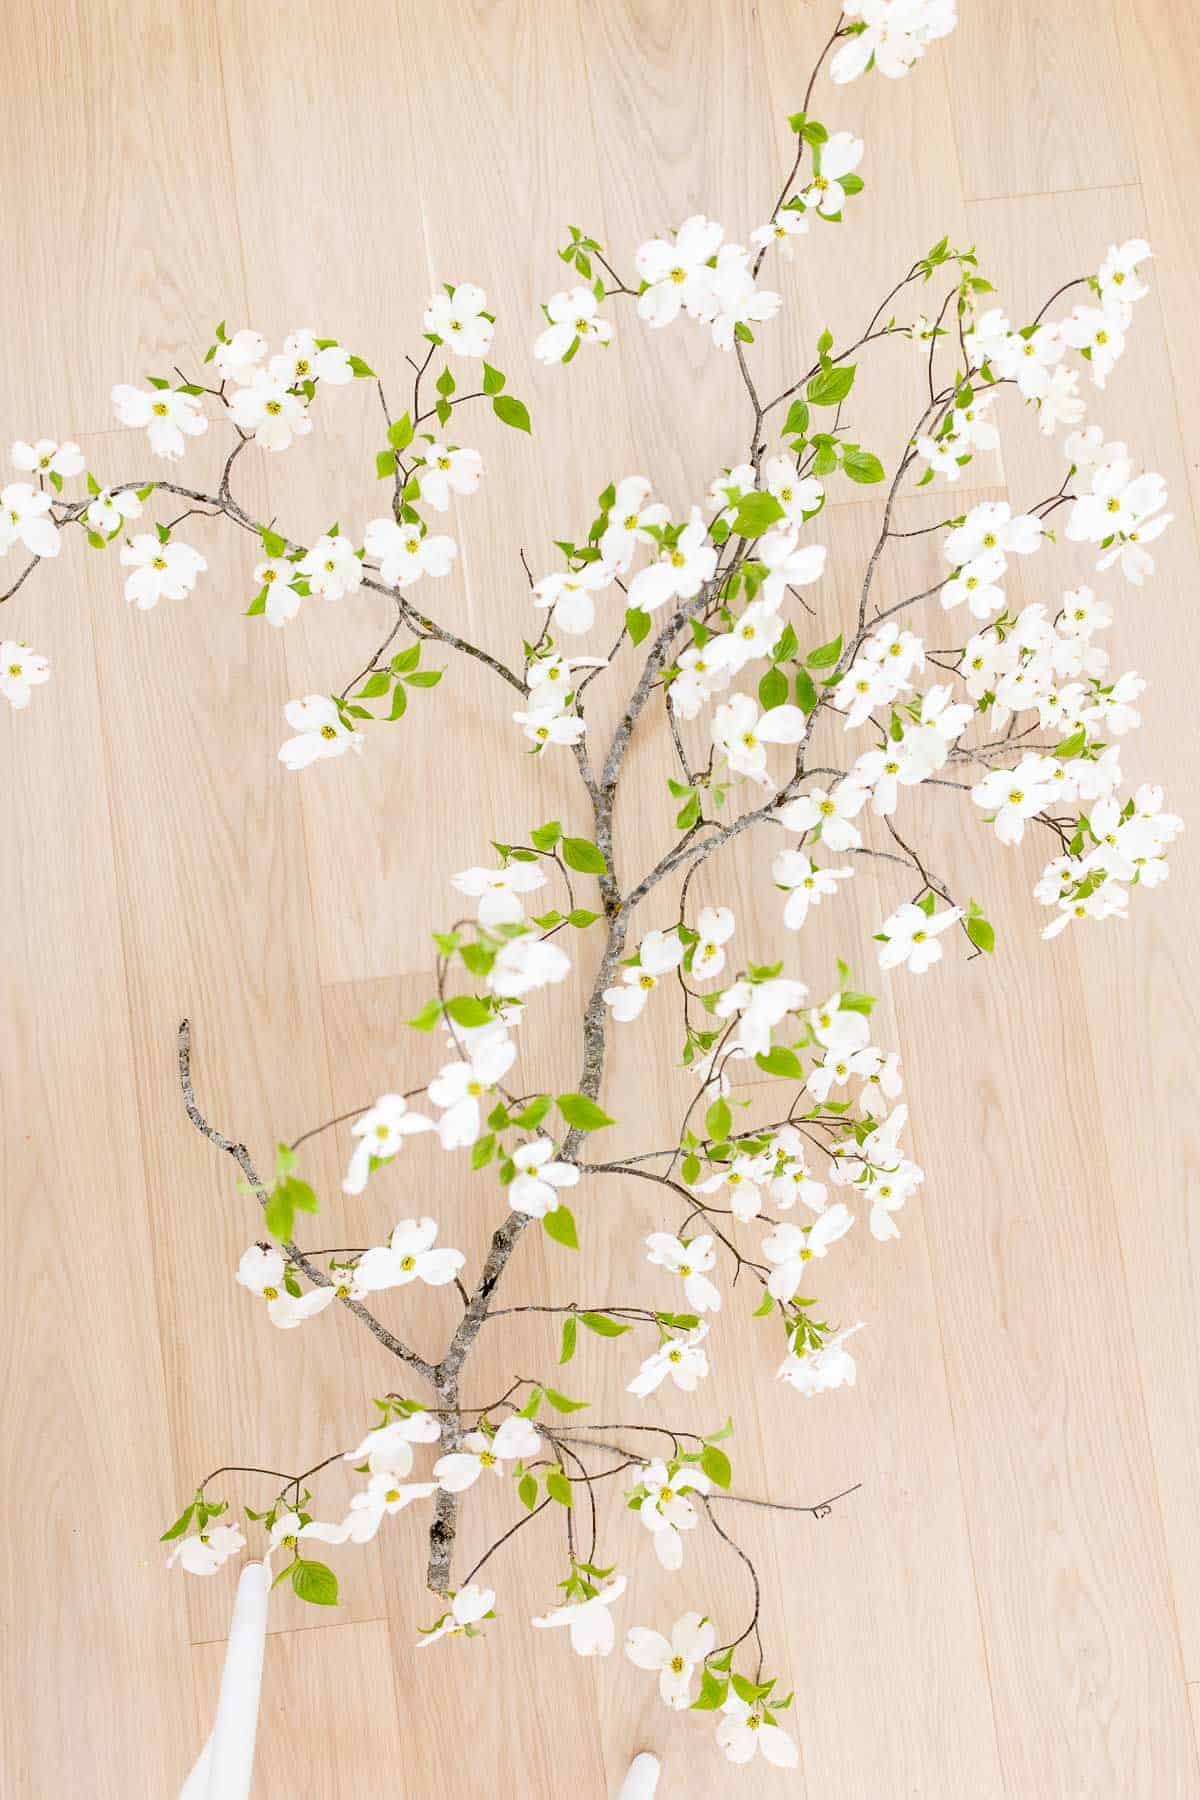 White oak floors with a branch of white blooming dogwood laying across.